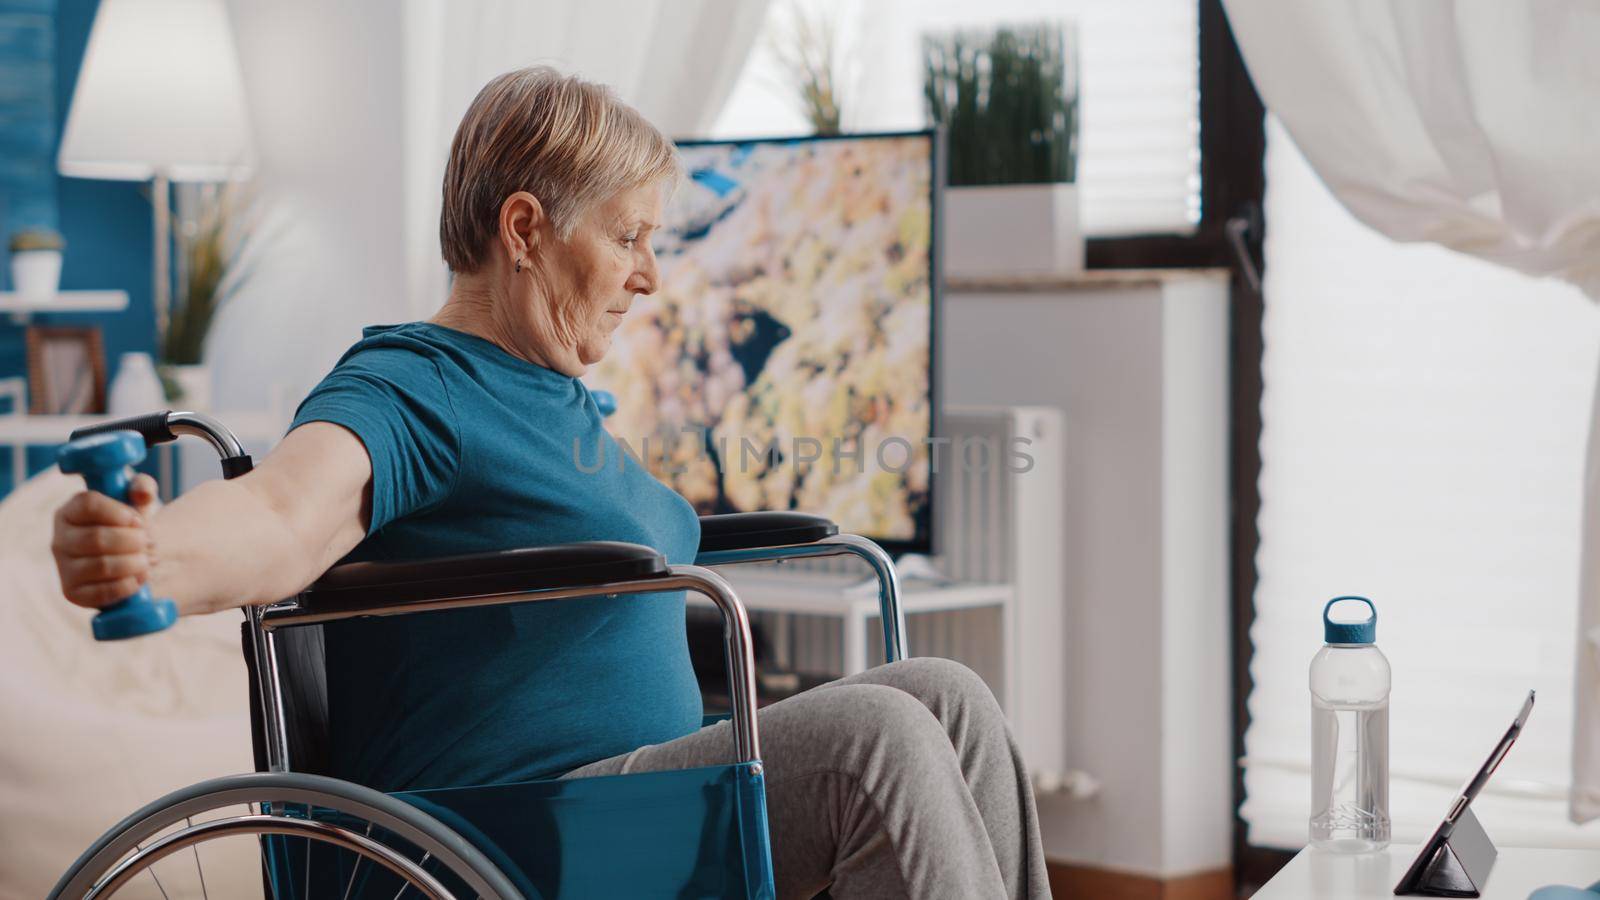 Old woman with disability using dumbbells to exercise and watching workout video on digital tablet. Retired person sitting in wheelchair, training with weights and looking at online lesson